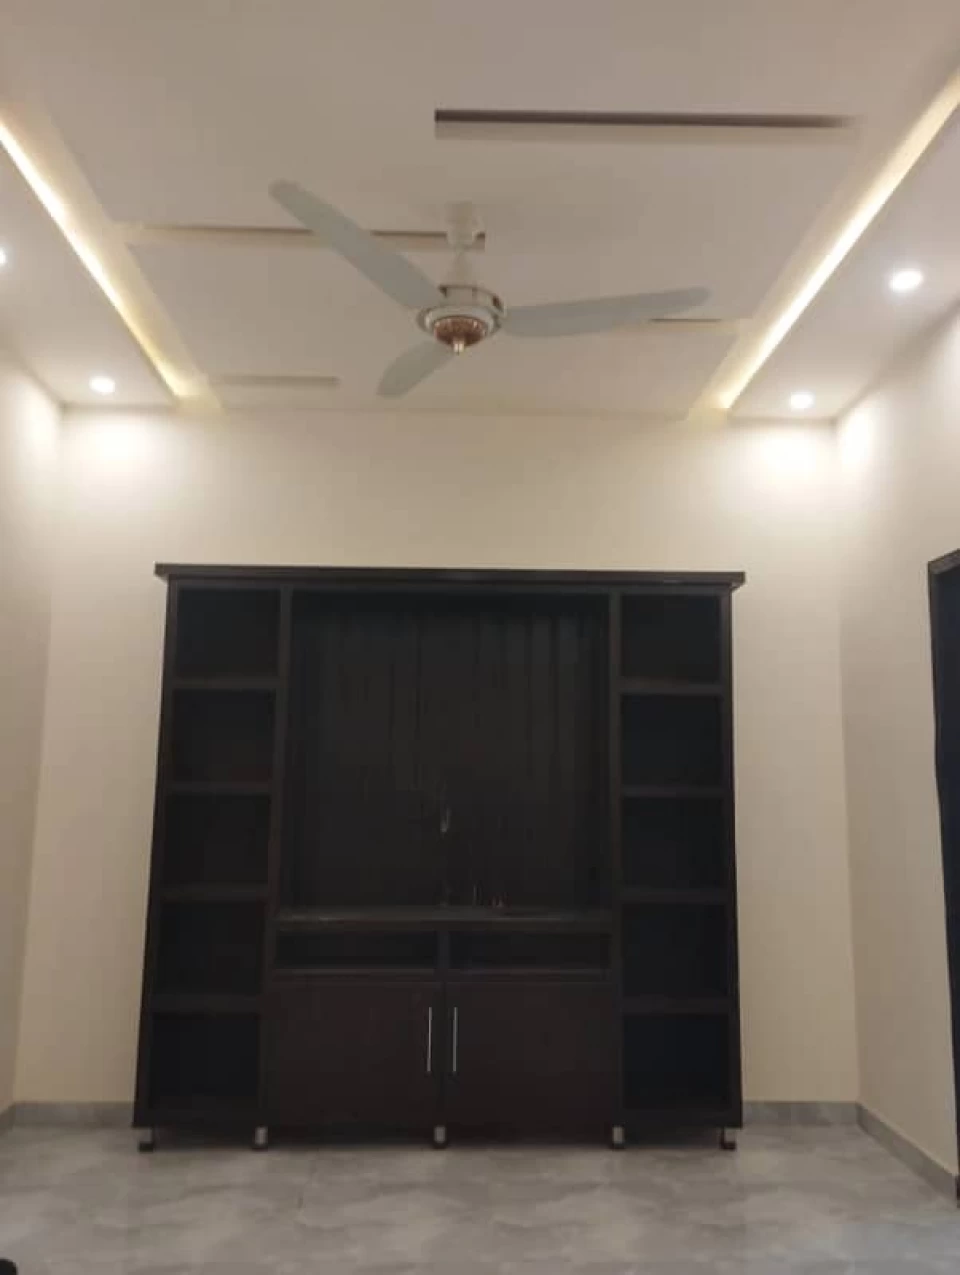 House For Sale in Lahore , House For Sale in Lake City , House For Sale in Lake City Lahore , House For Sale in Lake City , 6.25 Marla Corner Brand New House For Sale In M7b , Lake City, Lahore Pakistan,6 Bedrooms Bedrooms, 6 Rooms Rooms, 7 BathroomsBathrooms, House,For Sale,3101